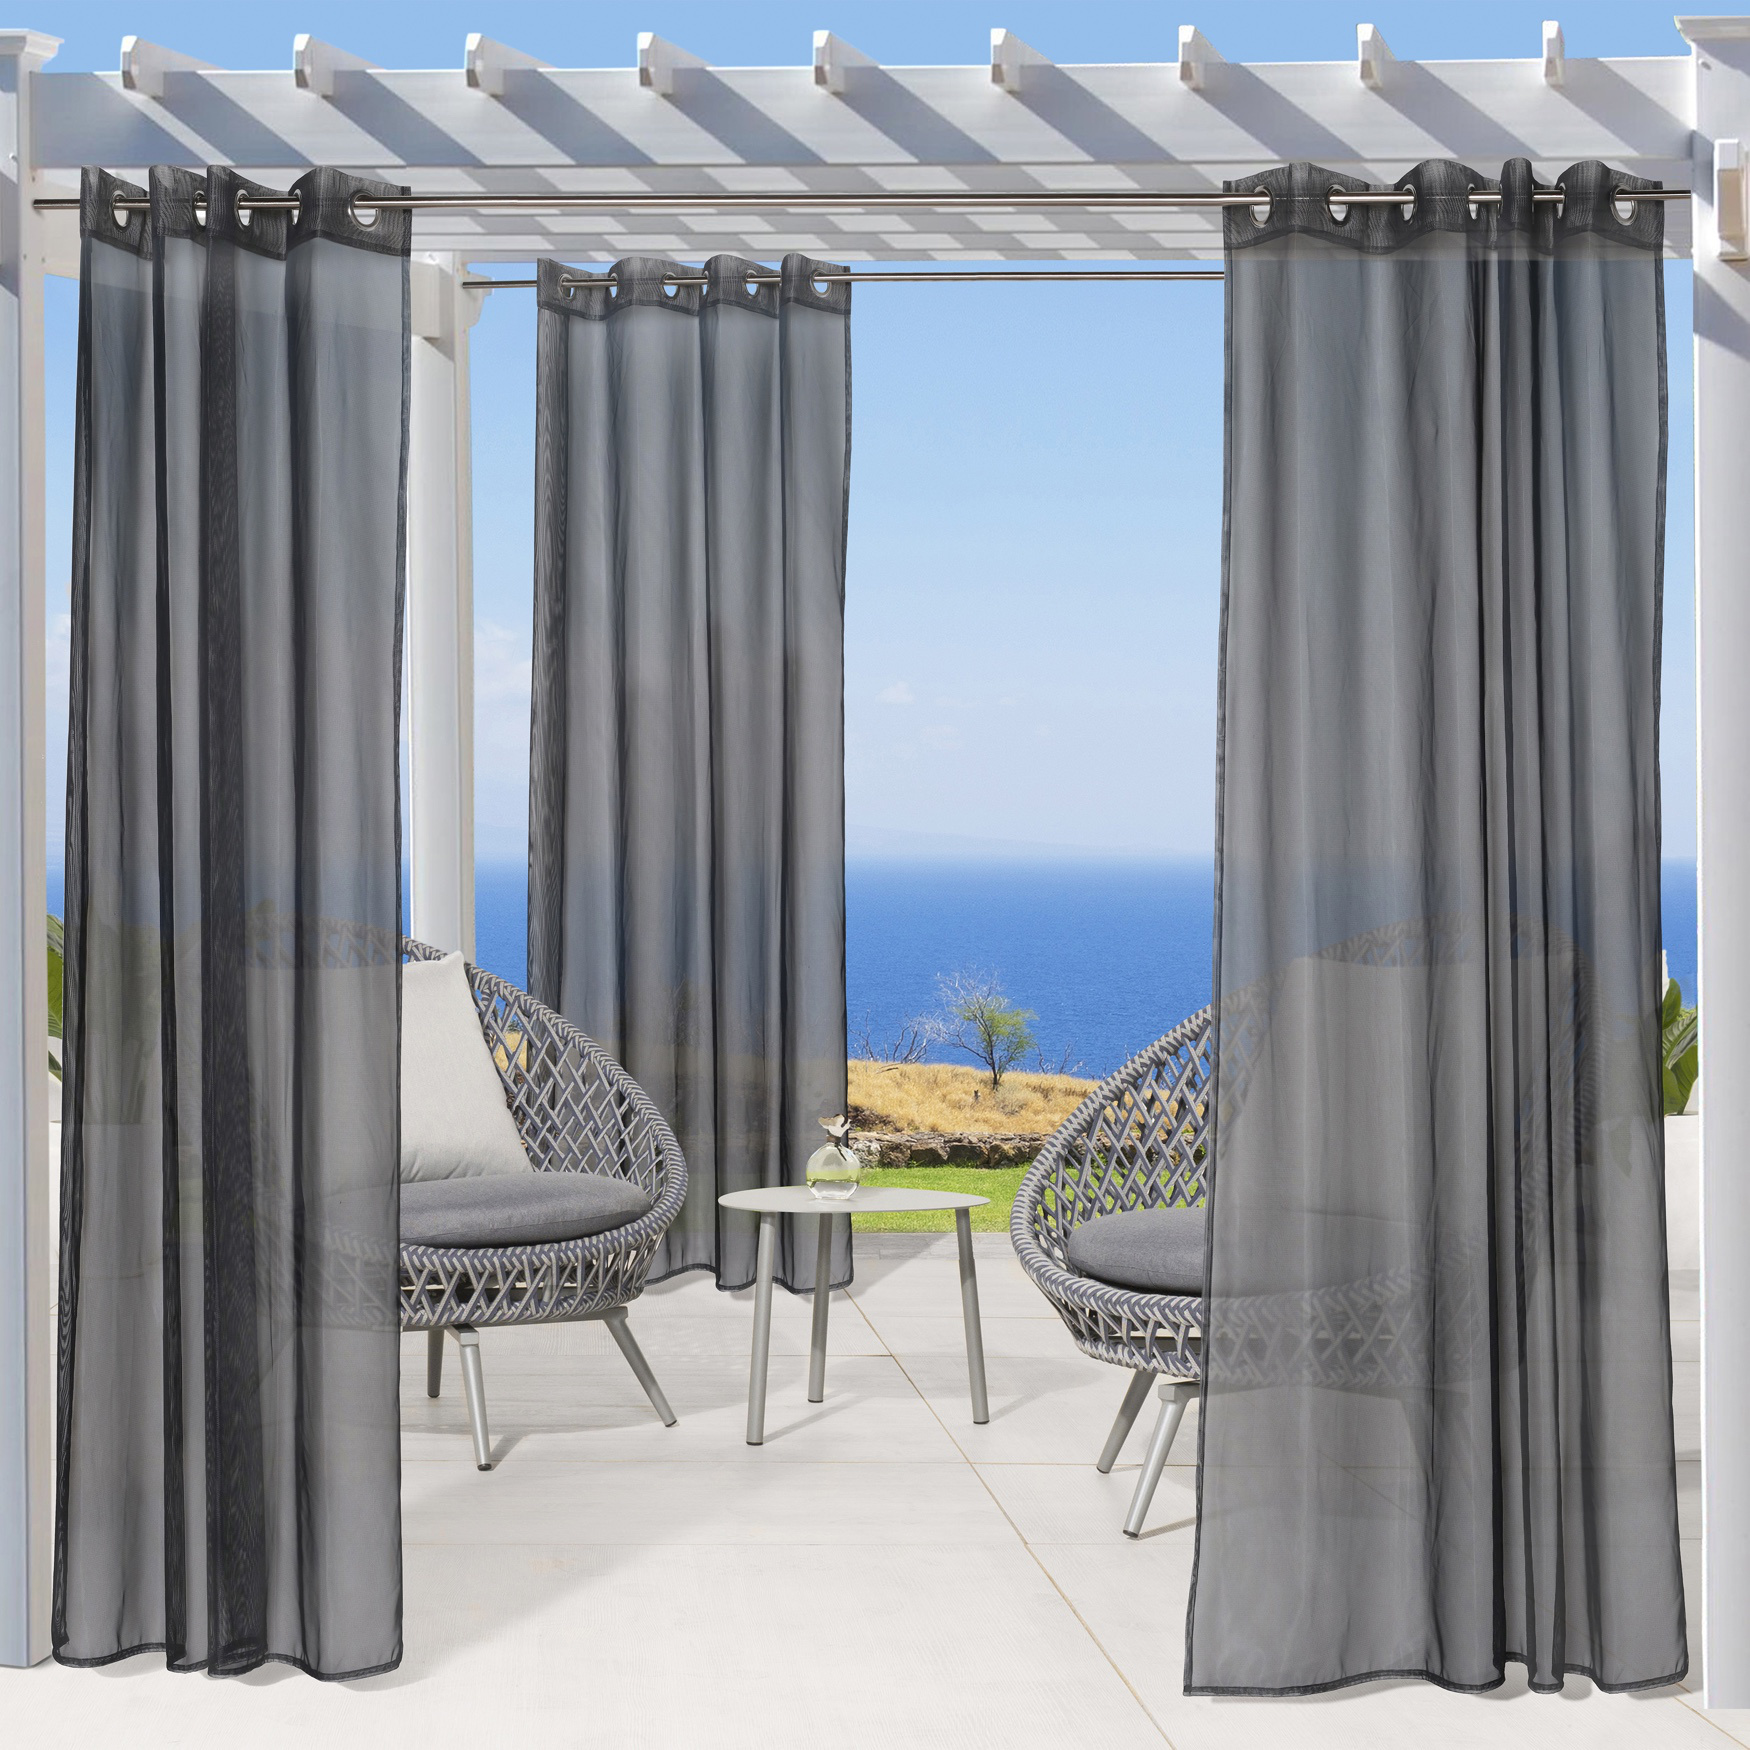 No Se’Um Insect Repellent Outdoor Curtain, 